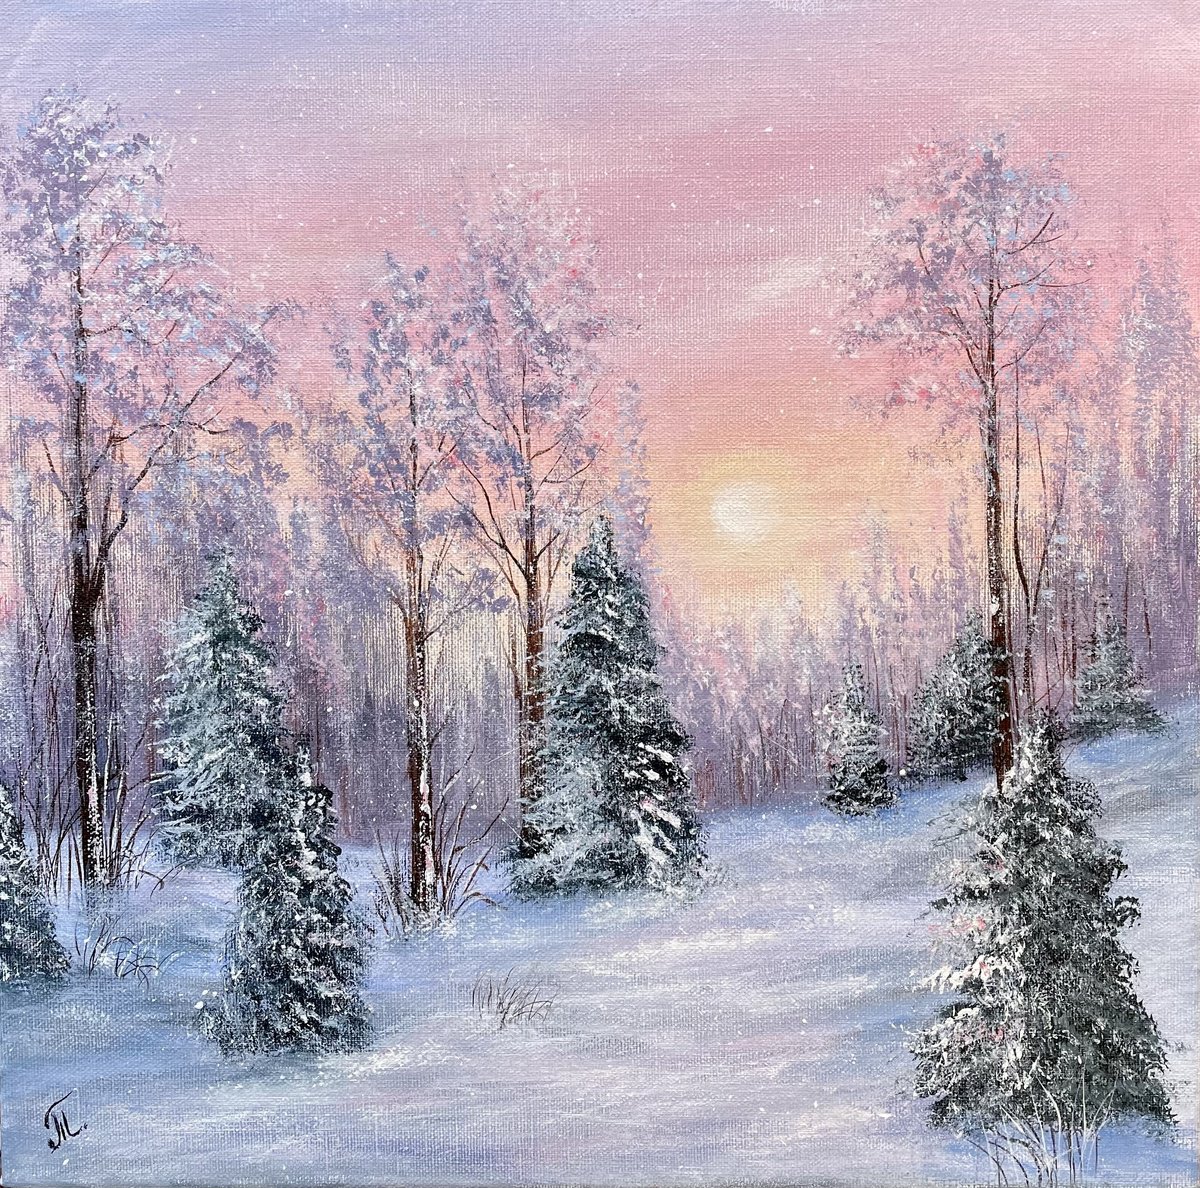 Winter Serenity: A Symphony in Pastel by Tanja Frost